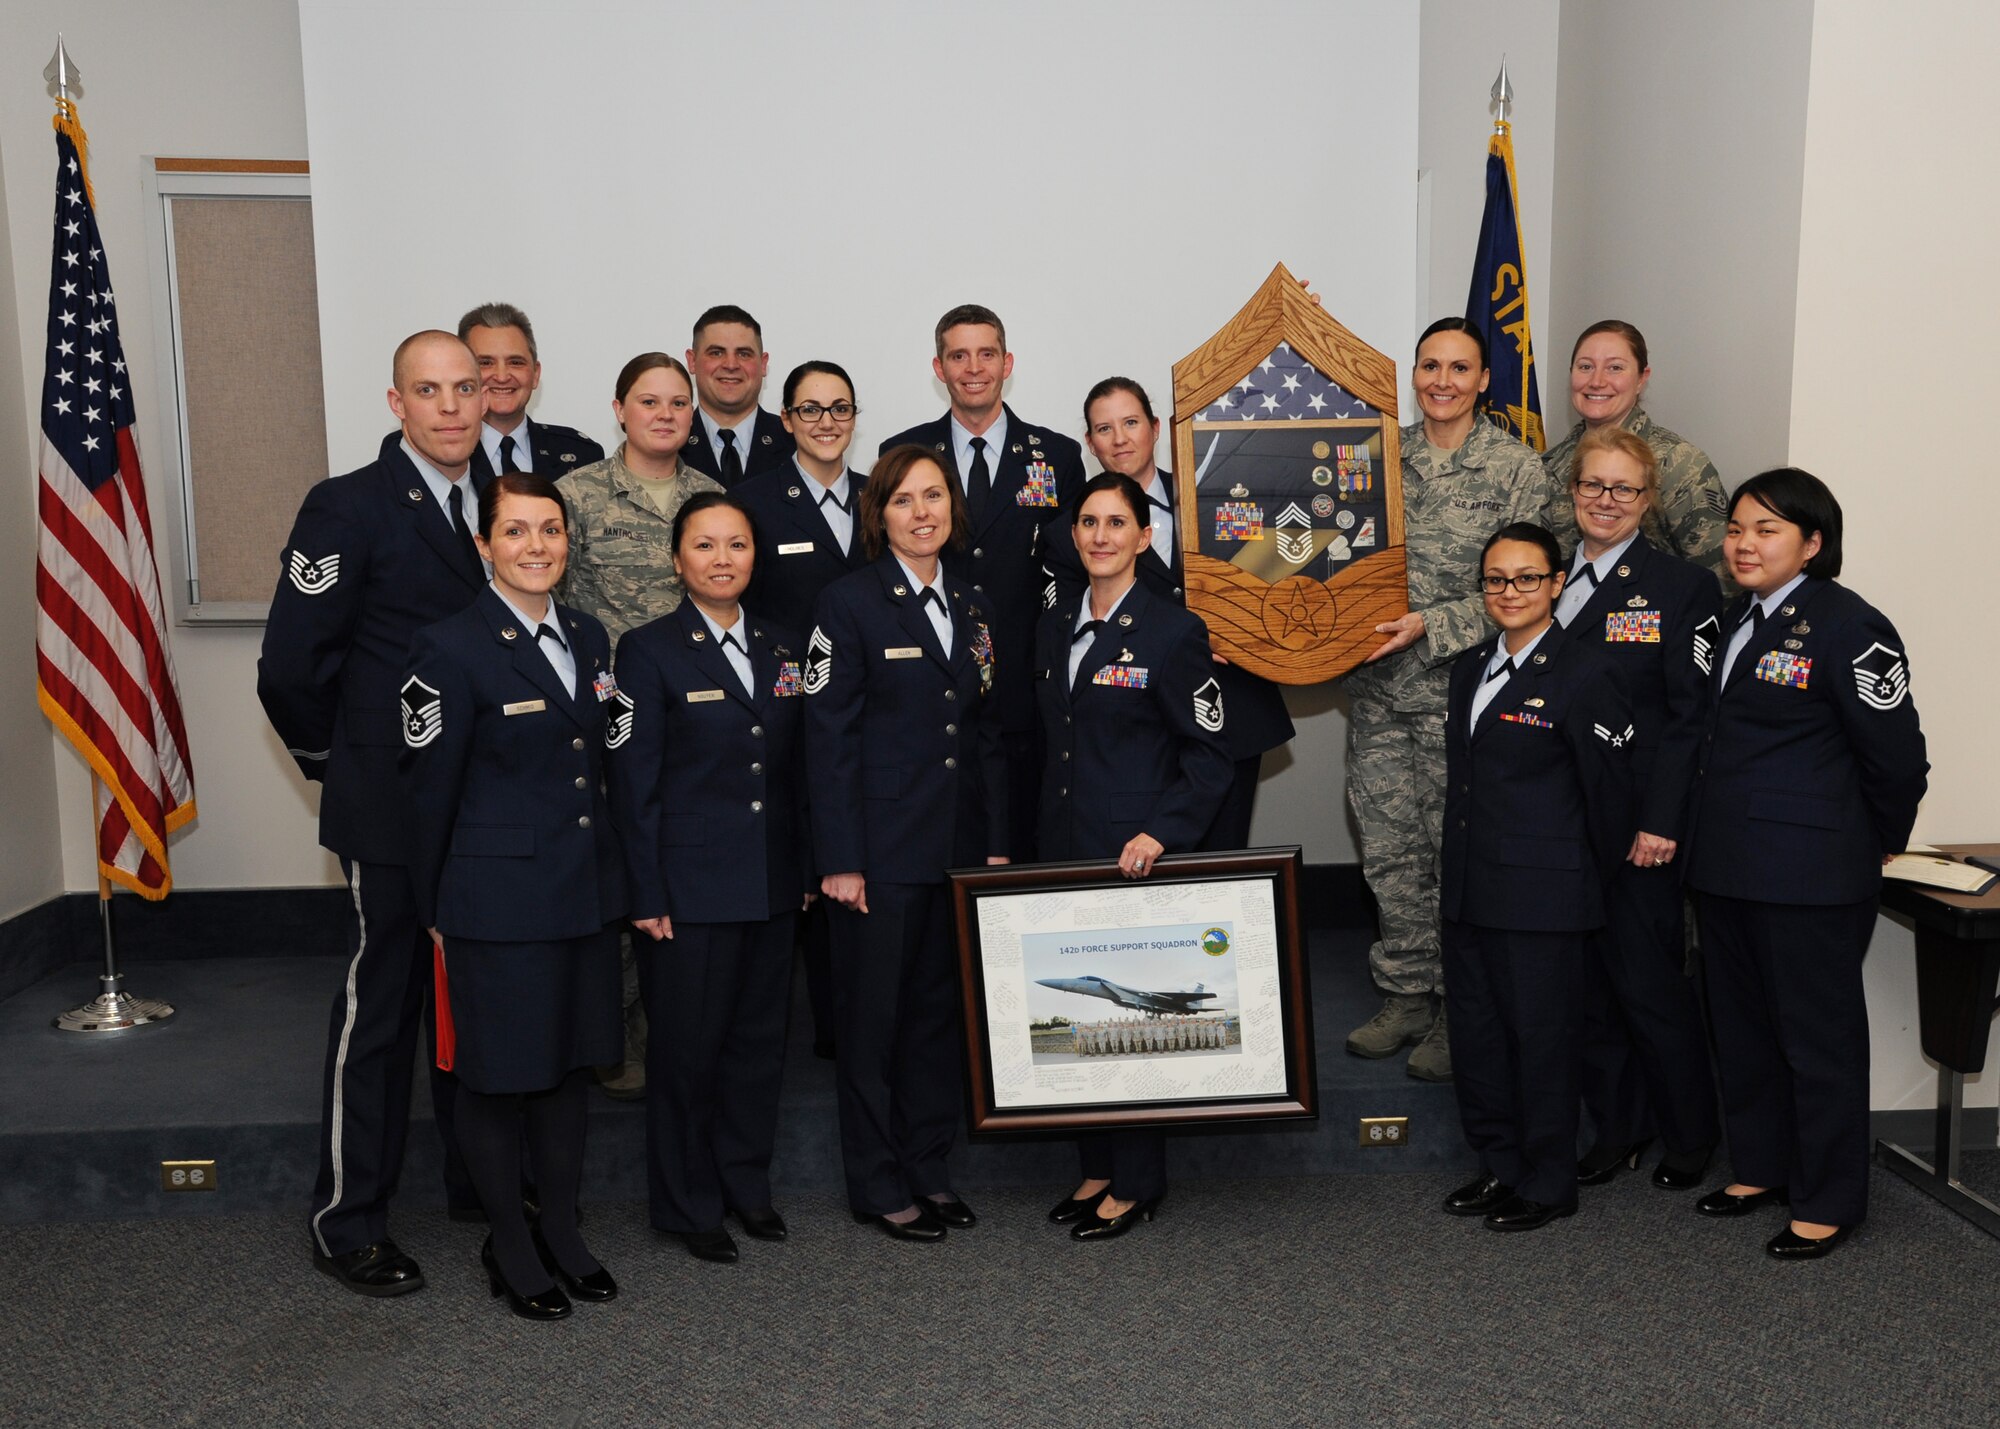 Members of the 142nd Fighter Wing Force Support Squadron gather for a group photograph after presenting several awards of recognition to Chief Master Sgt. Jean Allen, (center front row) during her retirement ceremony, Dec. 22, 2015, Portland Air National Guard Base, Ore. (Air National Guard photo by Tech. Sgt. John Hughel, 142nd Fighter Wing Public Affairs)